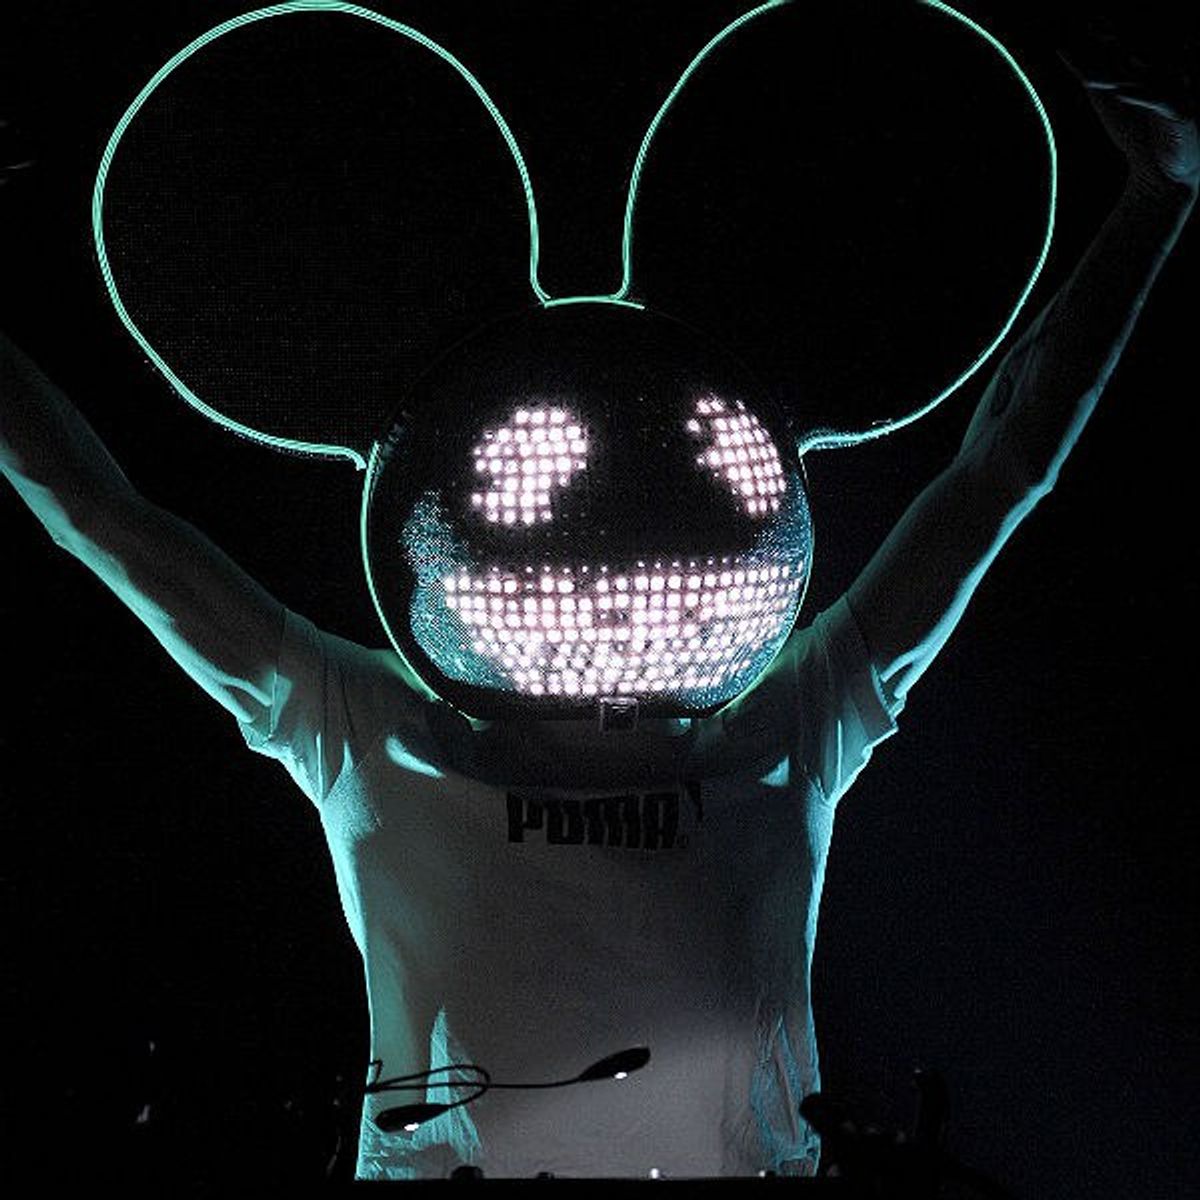 deadmau5 Released An Album And I Had Trouble Writing About It